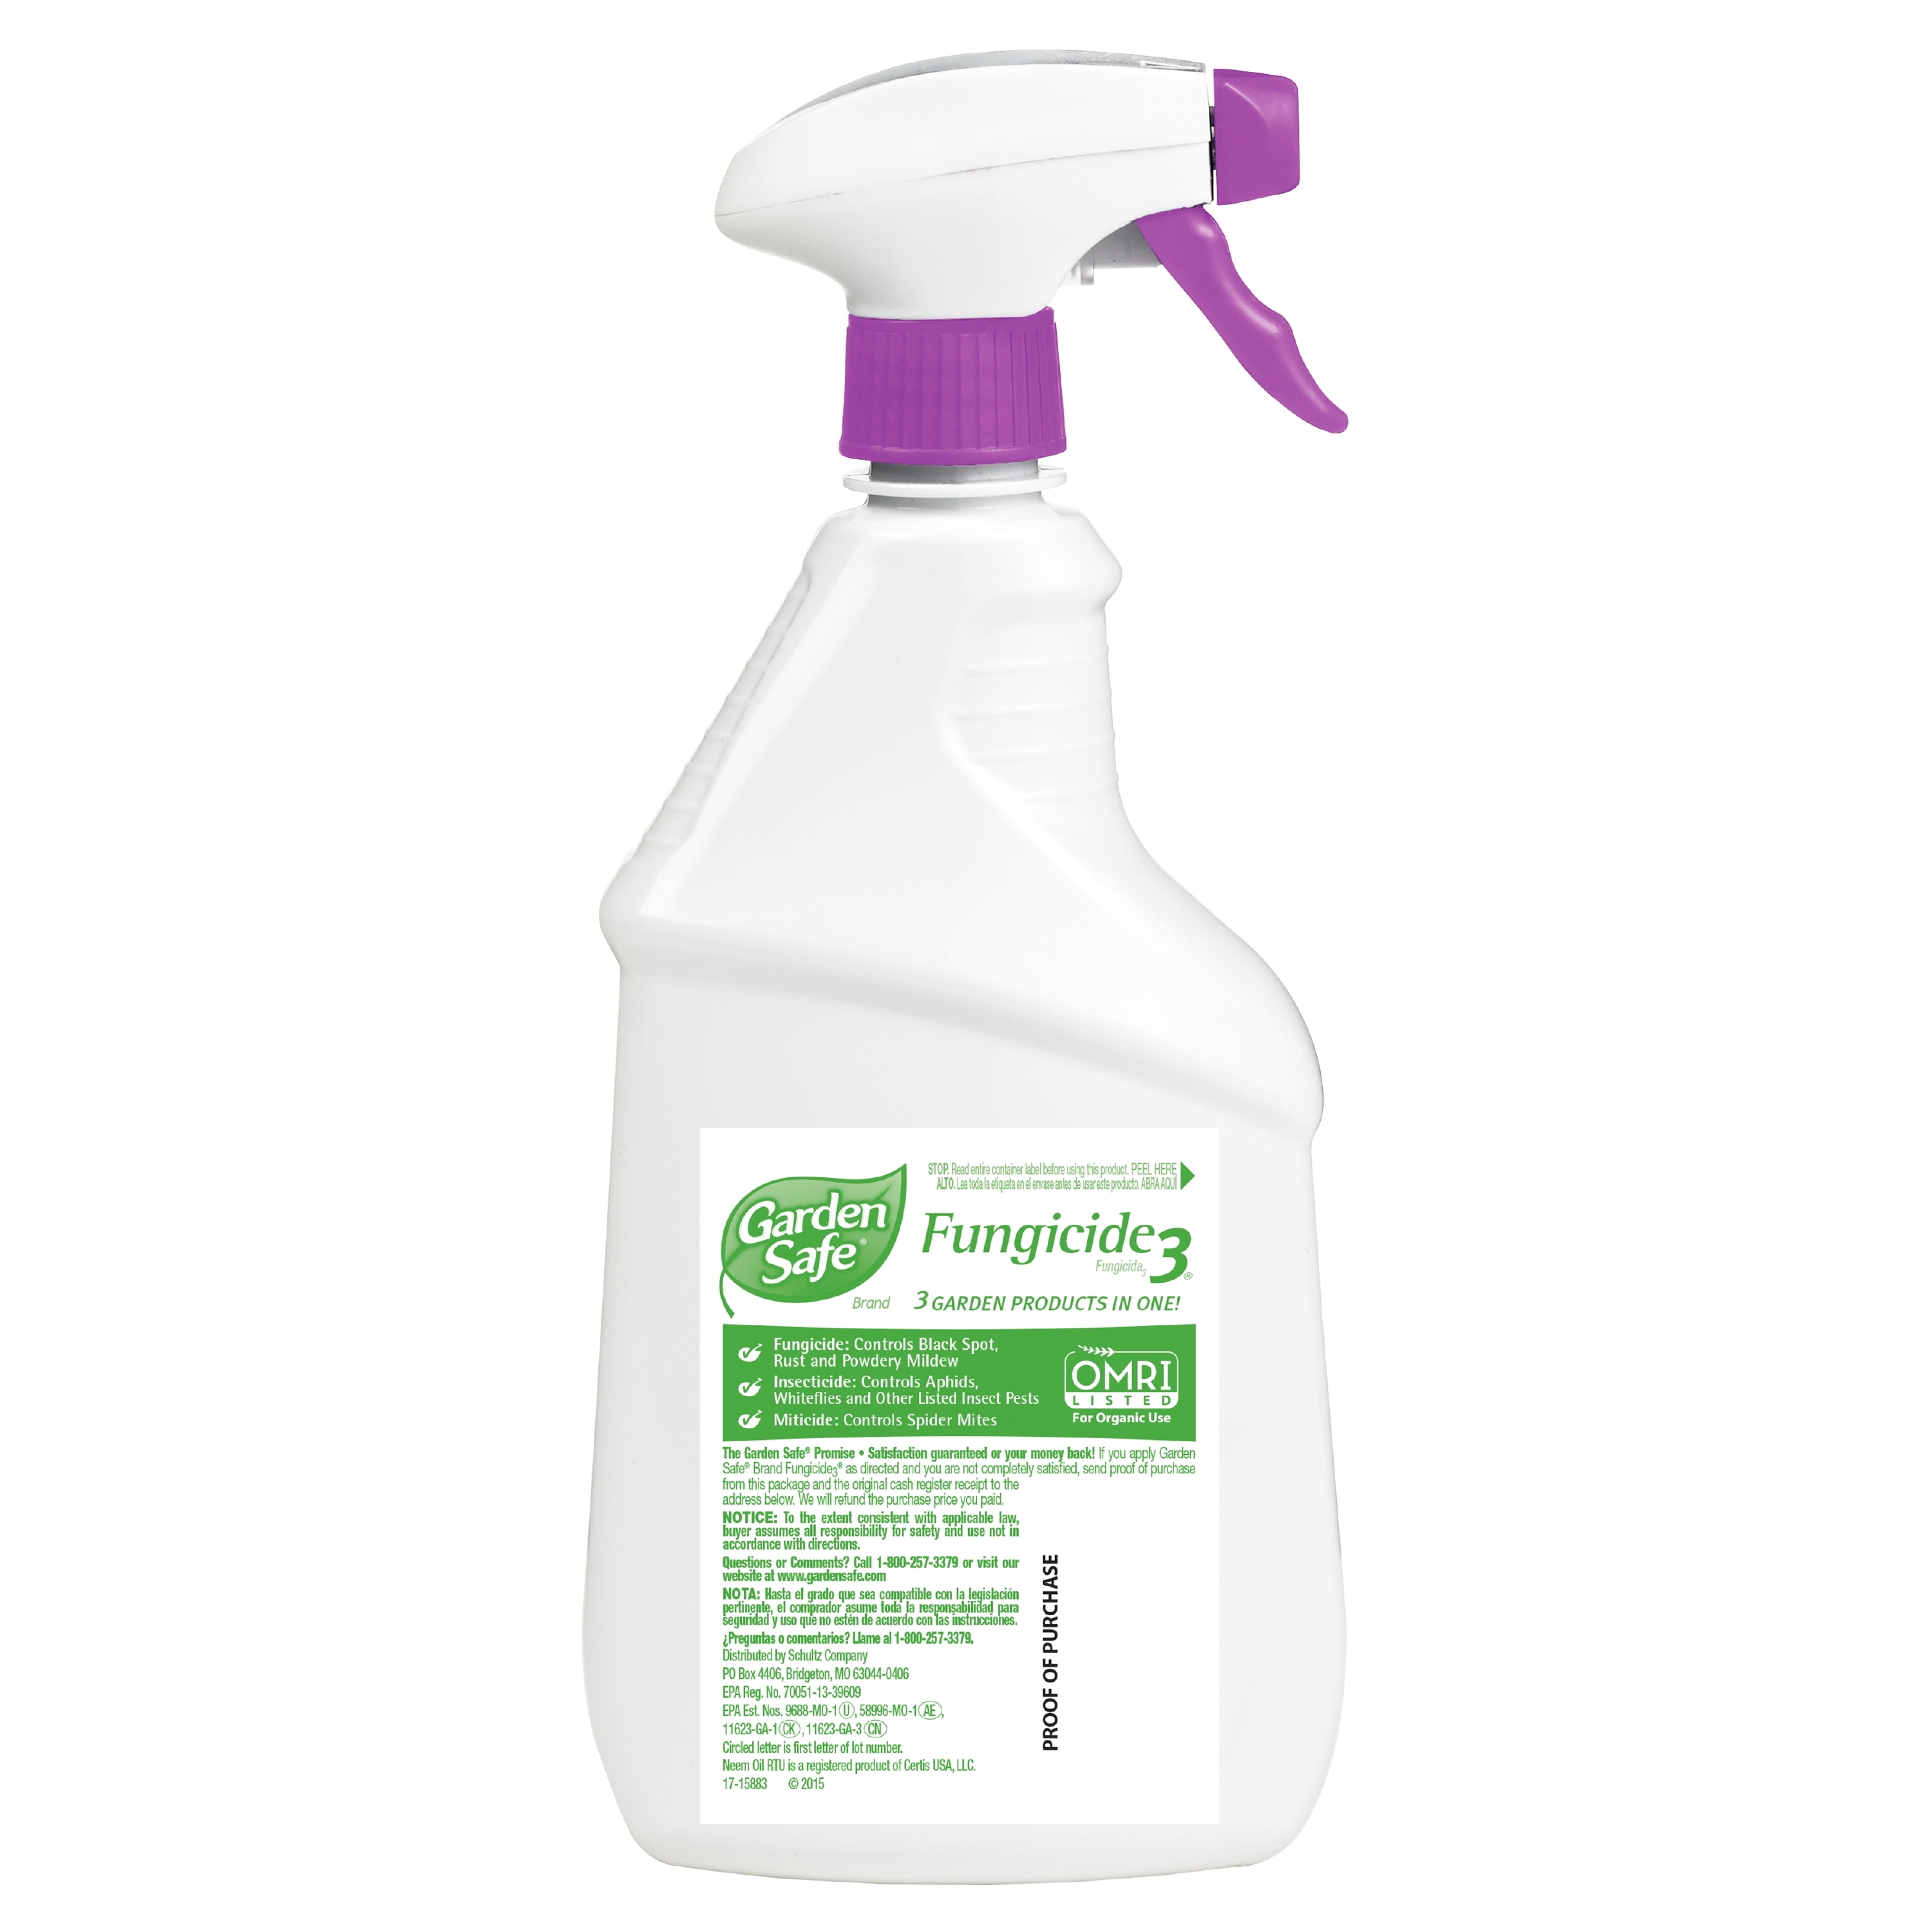 Garden Safe Brand Fungicide3 24 Ounces, 3 Garden Products in 1 - image 3 of 5